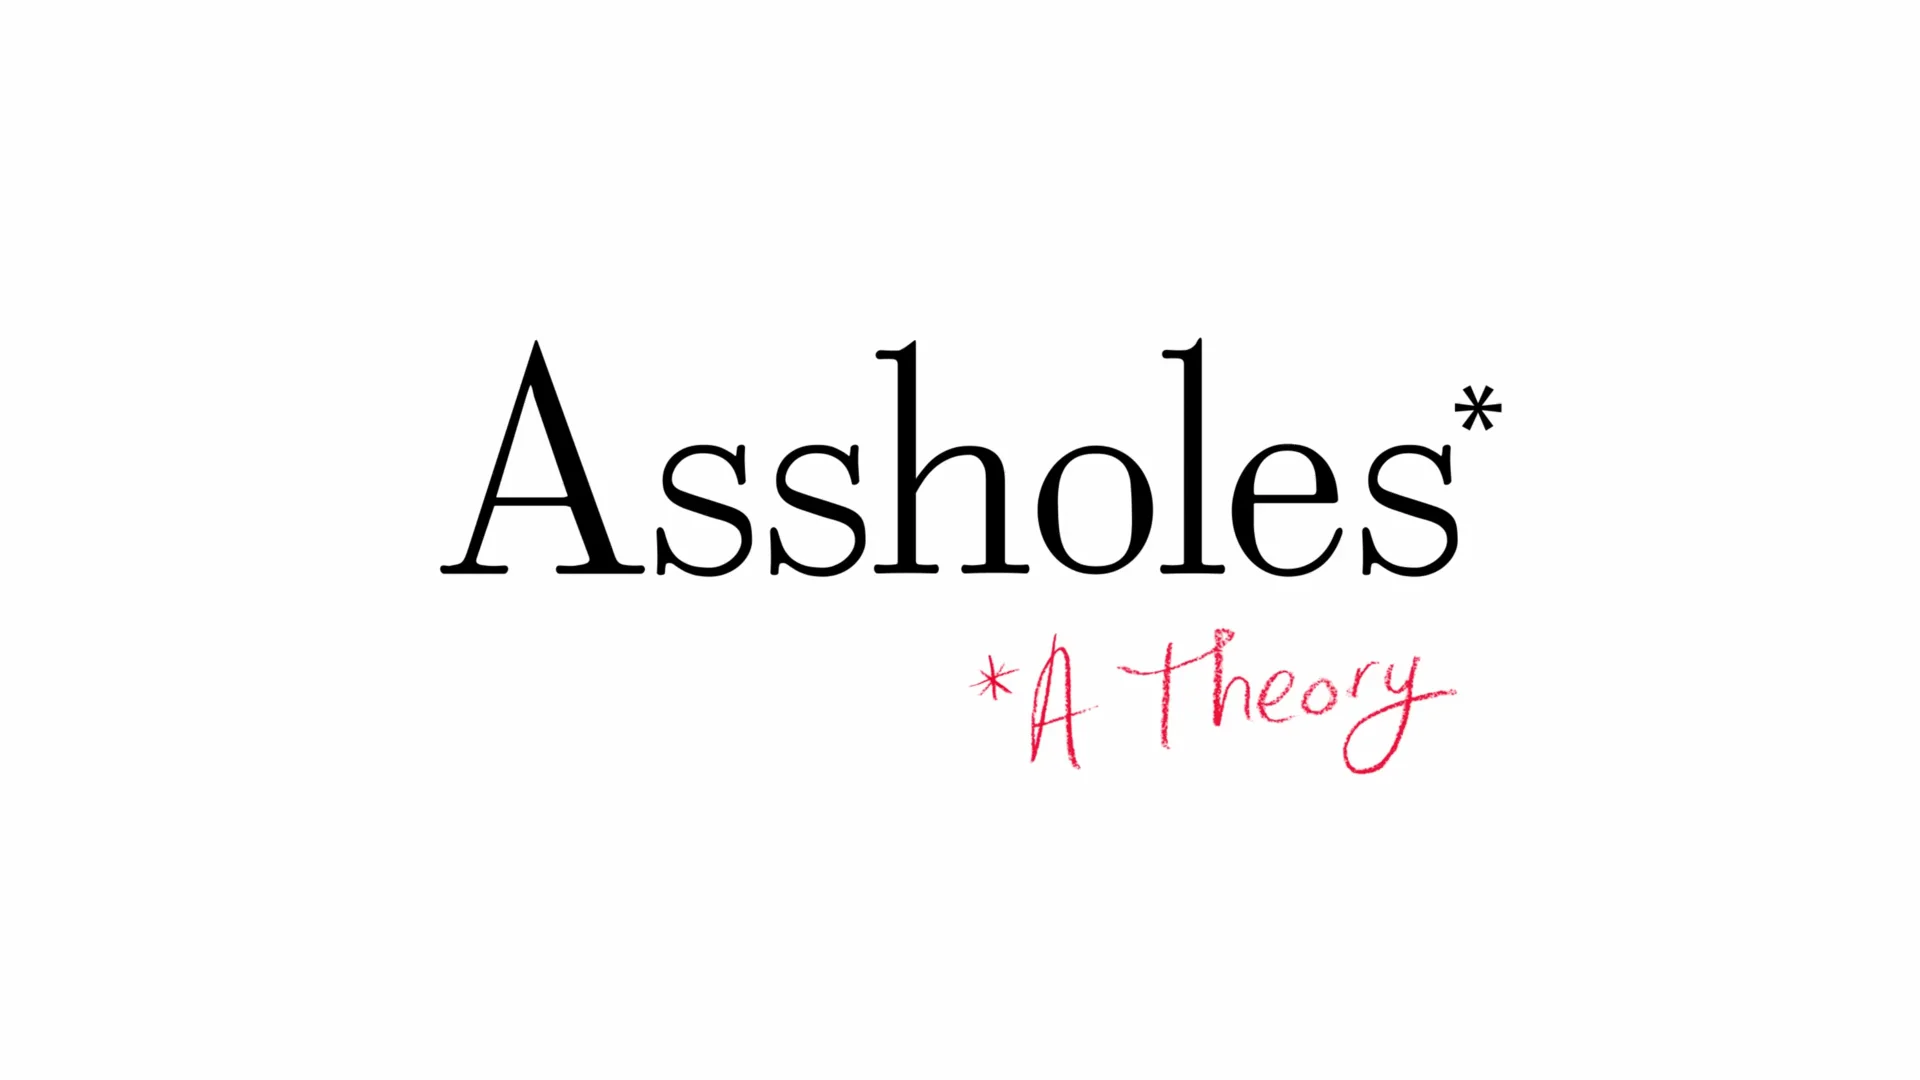 Assholes, A Theory (Trailer 2 min. - COMING SOON)  